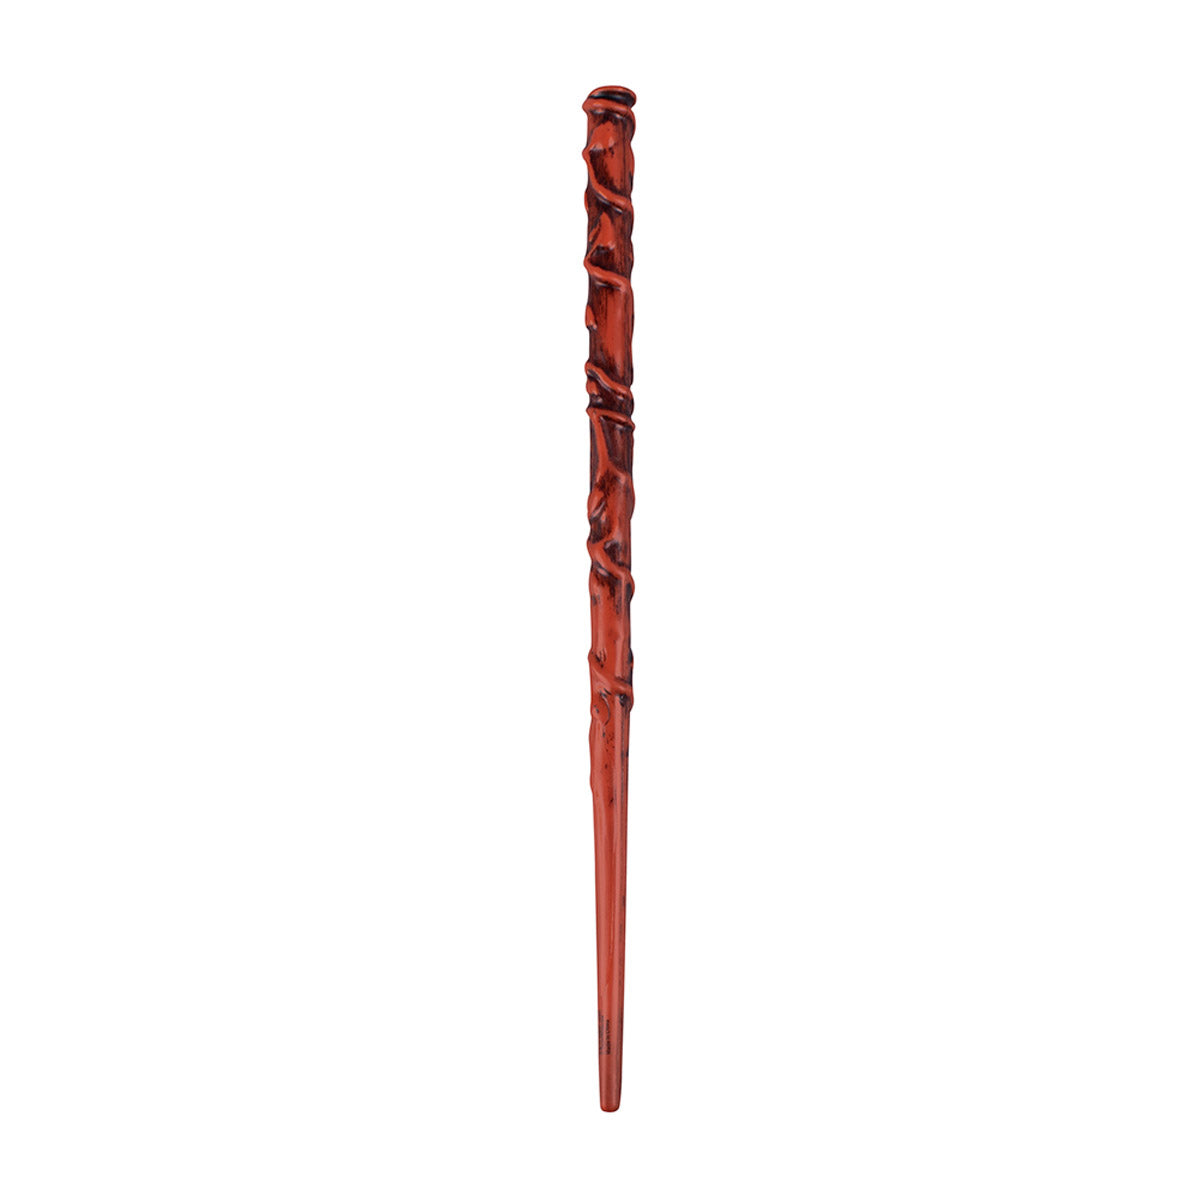 Hermione Granger Wand Disguise 107599